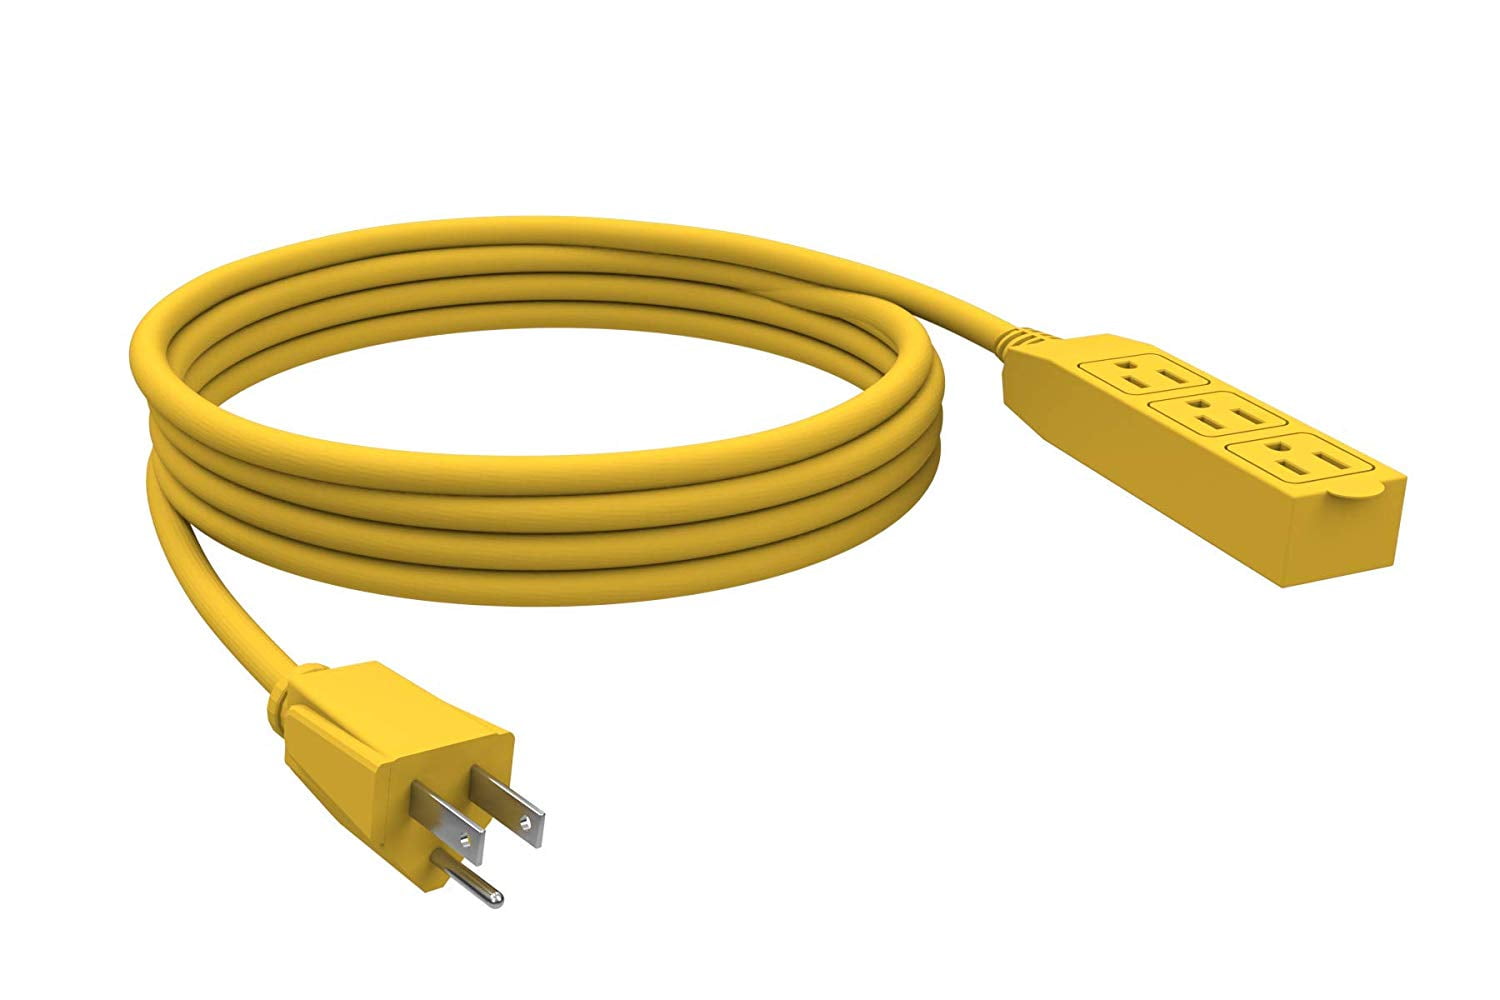 Stanley 31912 Cordmax Shop 12, 3 Outlet Grounded Extension Cord, Yellow, 